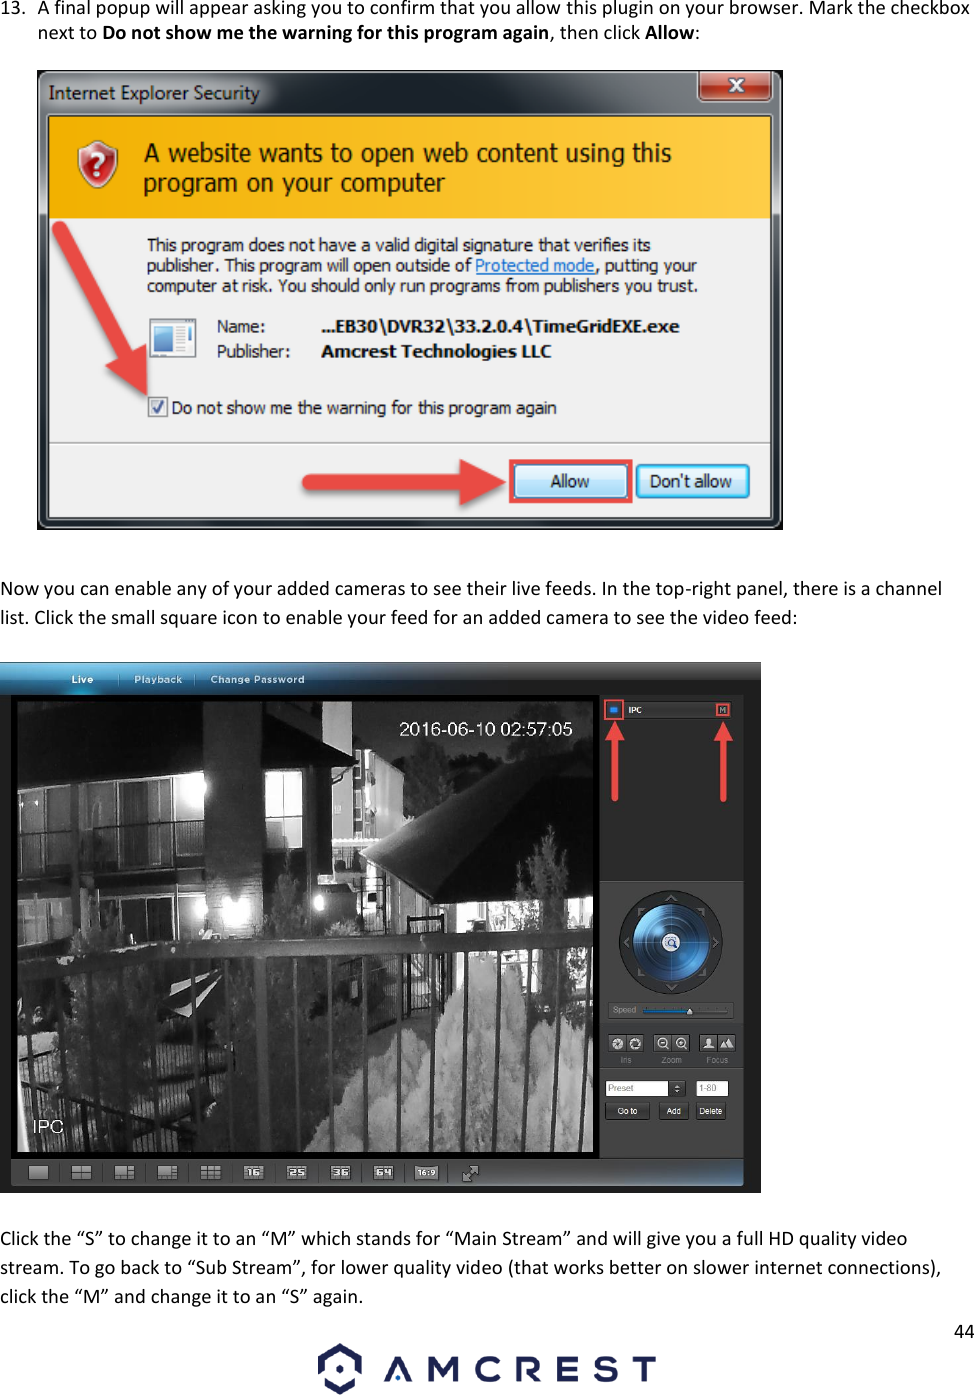 44   13. A final popup will appear asking you to confirm that you allow this plugin on your browser. Mark the checkbox next to Do not show me the warning for this program again, then click Allow:     Now you can enable any of your added cameras to see their live feeds. In the top-right panel, there is a channel list. Click the small square icon to enable your feed for an added camera to see the video feed:    Click the “S” to change it to an “M” which stands for “Main Stream” and will give you a full HD quality video stream. To go back to “Sub Stream”, for lower quality video (that works better on slower internet connections), click the “M” and change it to an “S” again.   